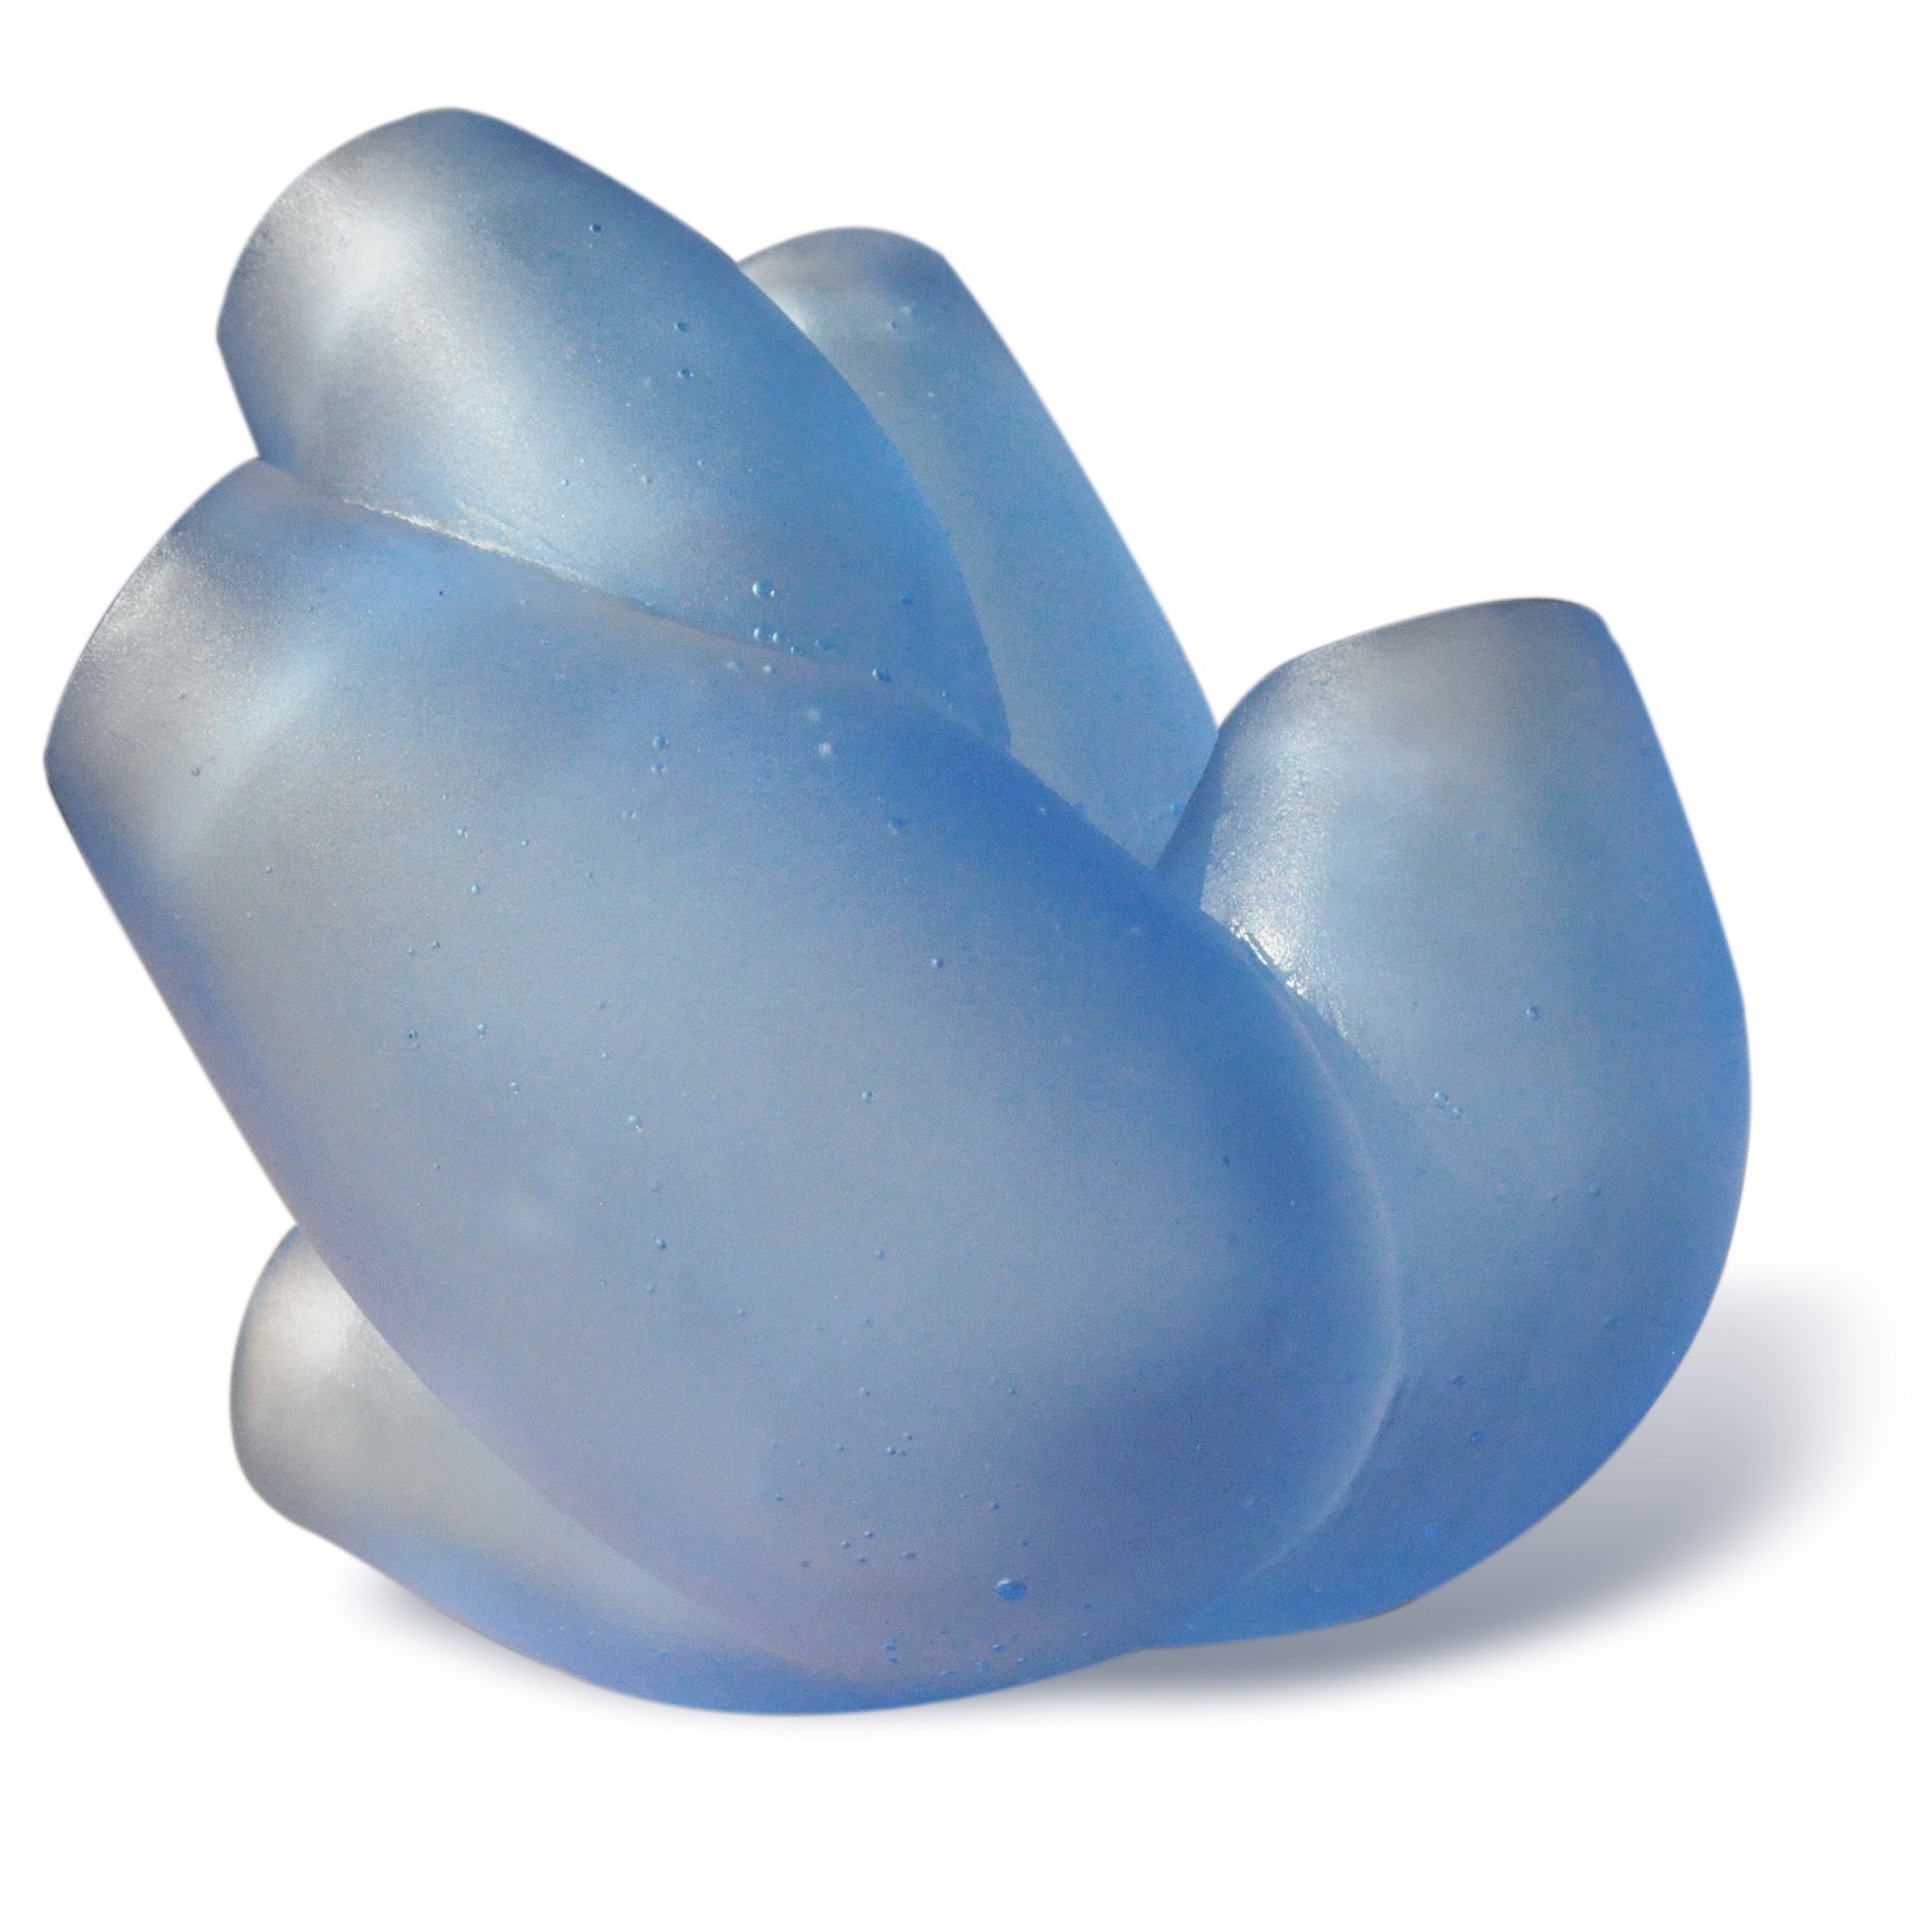 Hollow abstract cast glass sculpture of a sea squirt by Stephen Williams